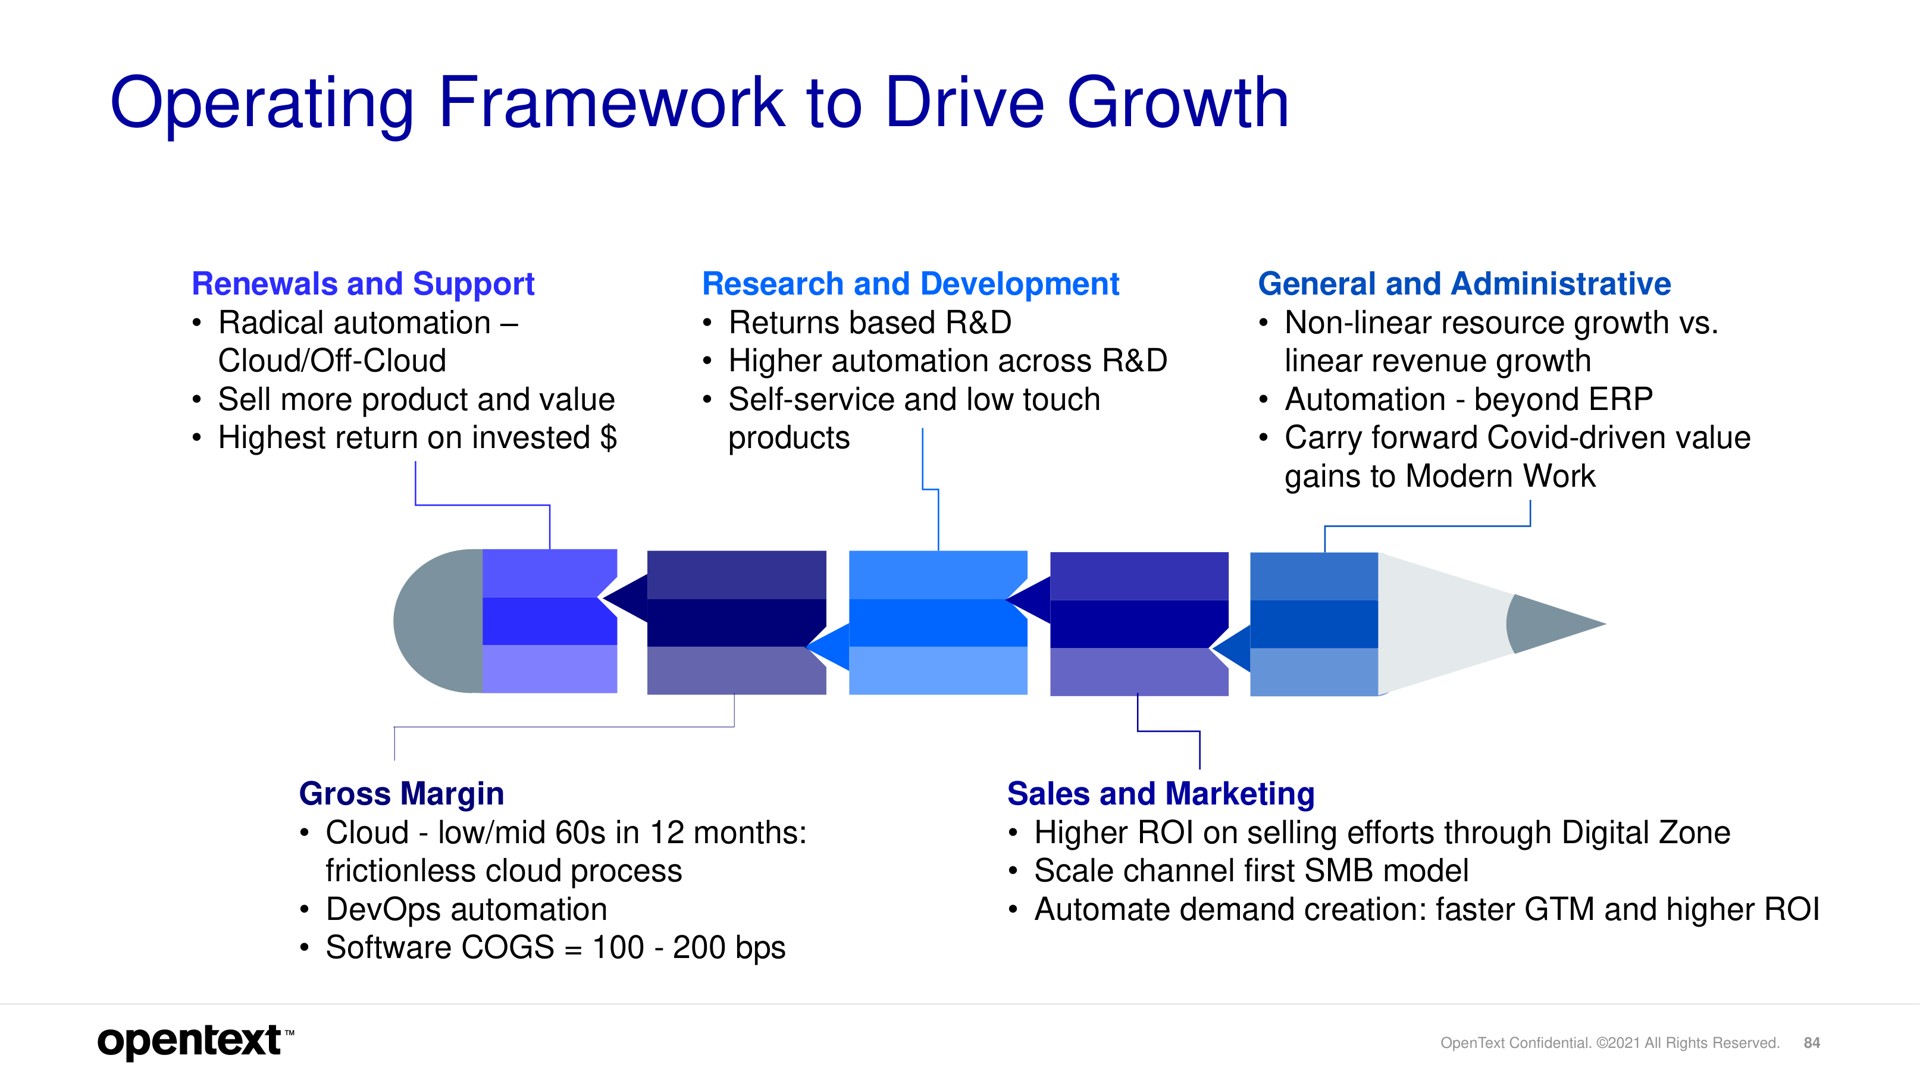 operating framework to drive growth | OpenText